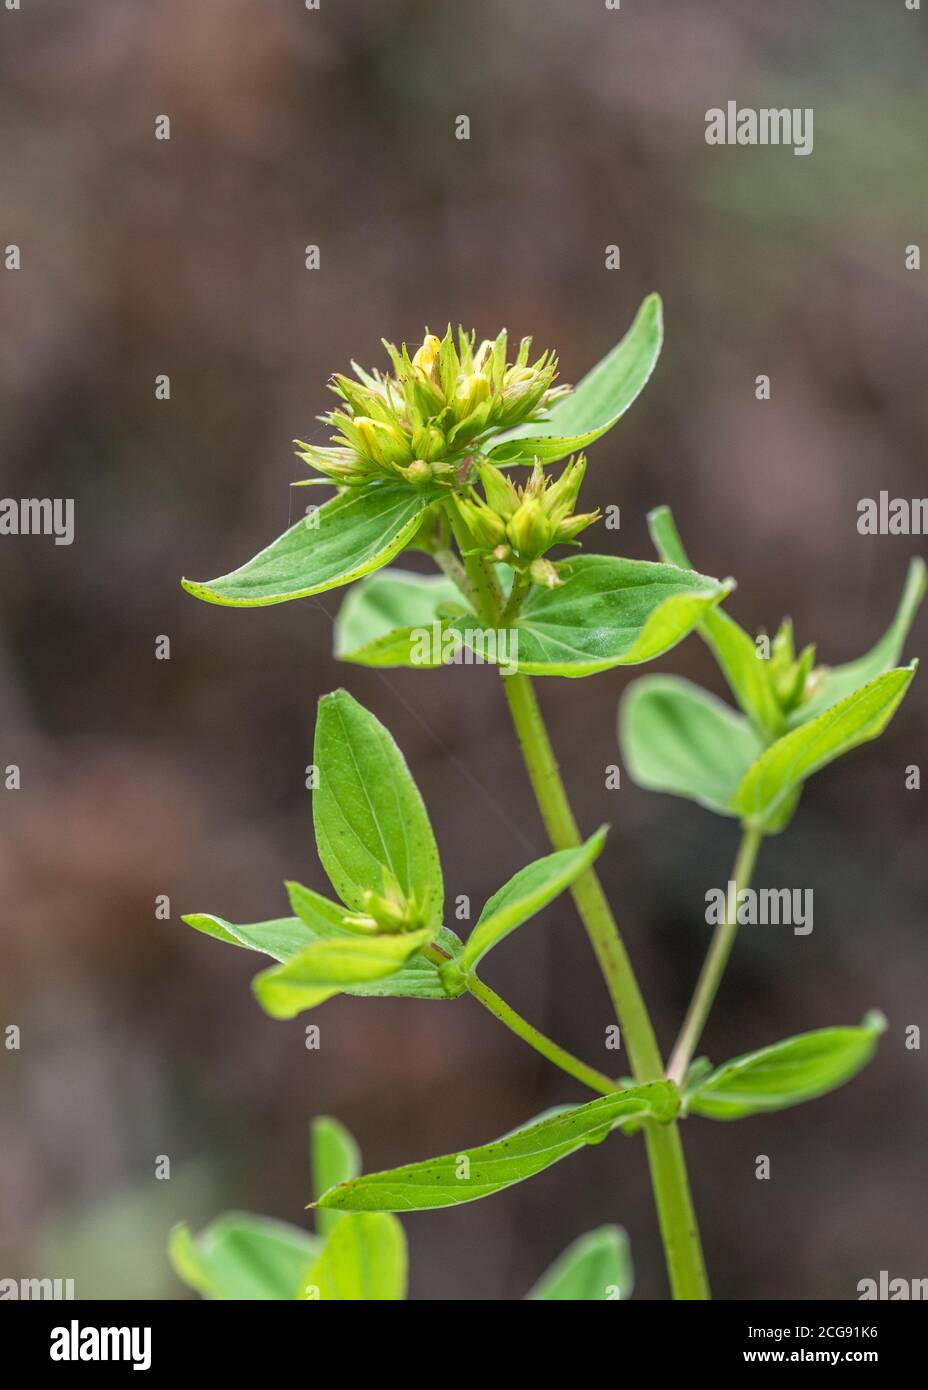 Flowers of what is thought to be Square-Stalked St. John's Wort / Hypericum tetrapterum = H. quadratum growing in damp ground. Read additional notes. Stock Photo